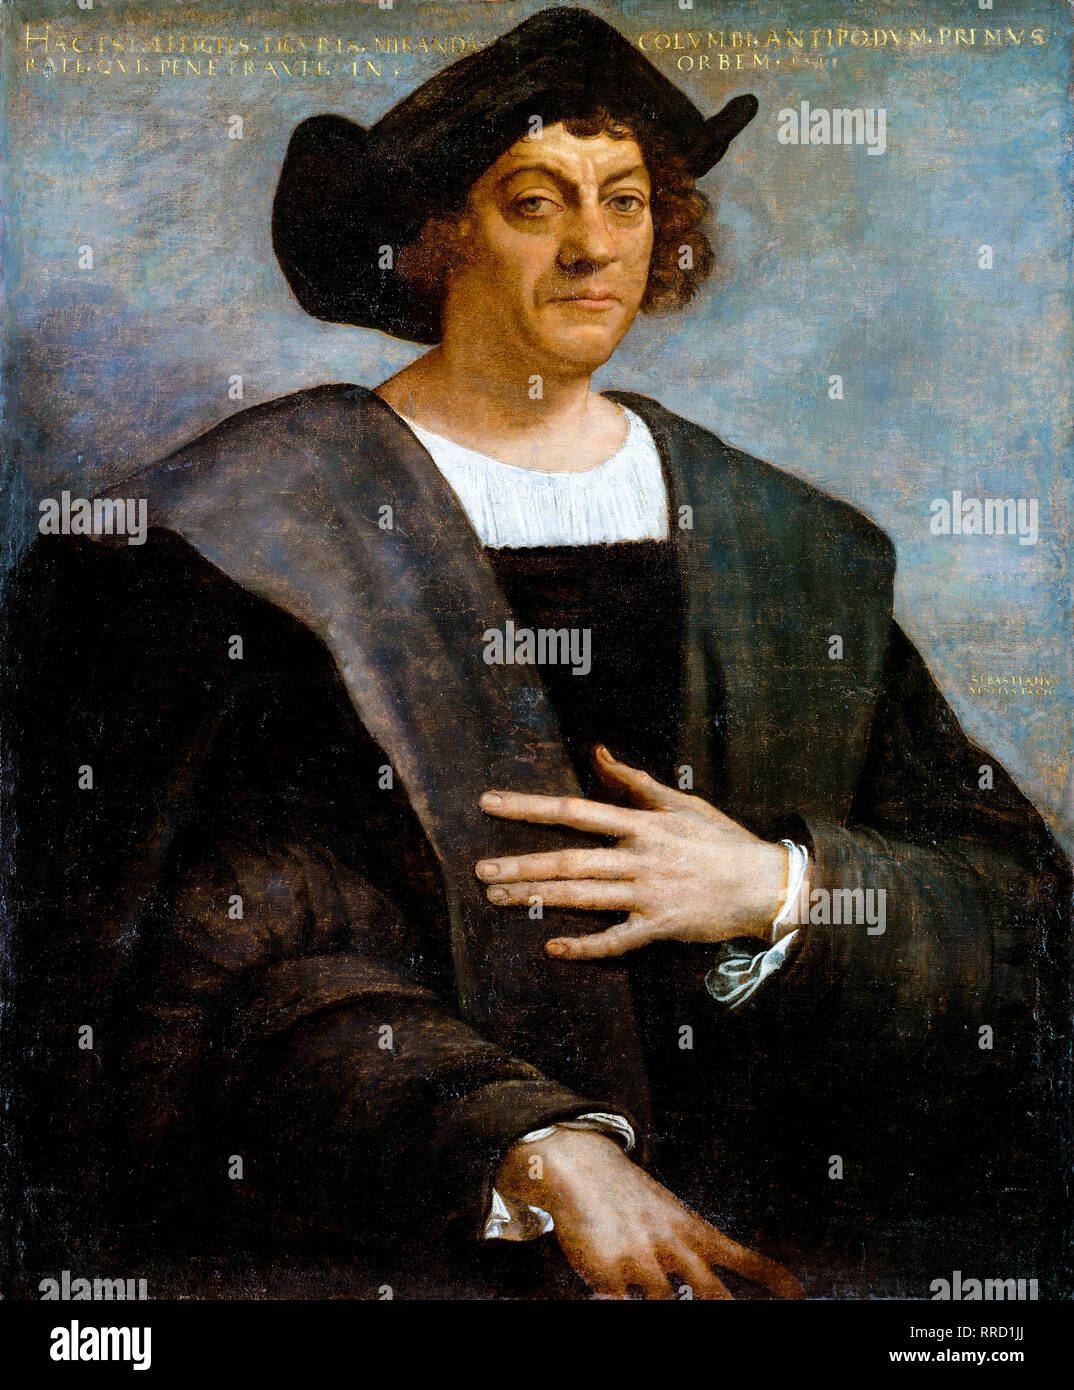 Portrait of a Man, said to be Christopher Columbus, 1519 painting Stock Photo